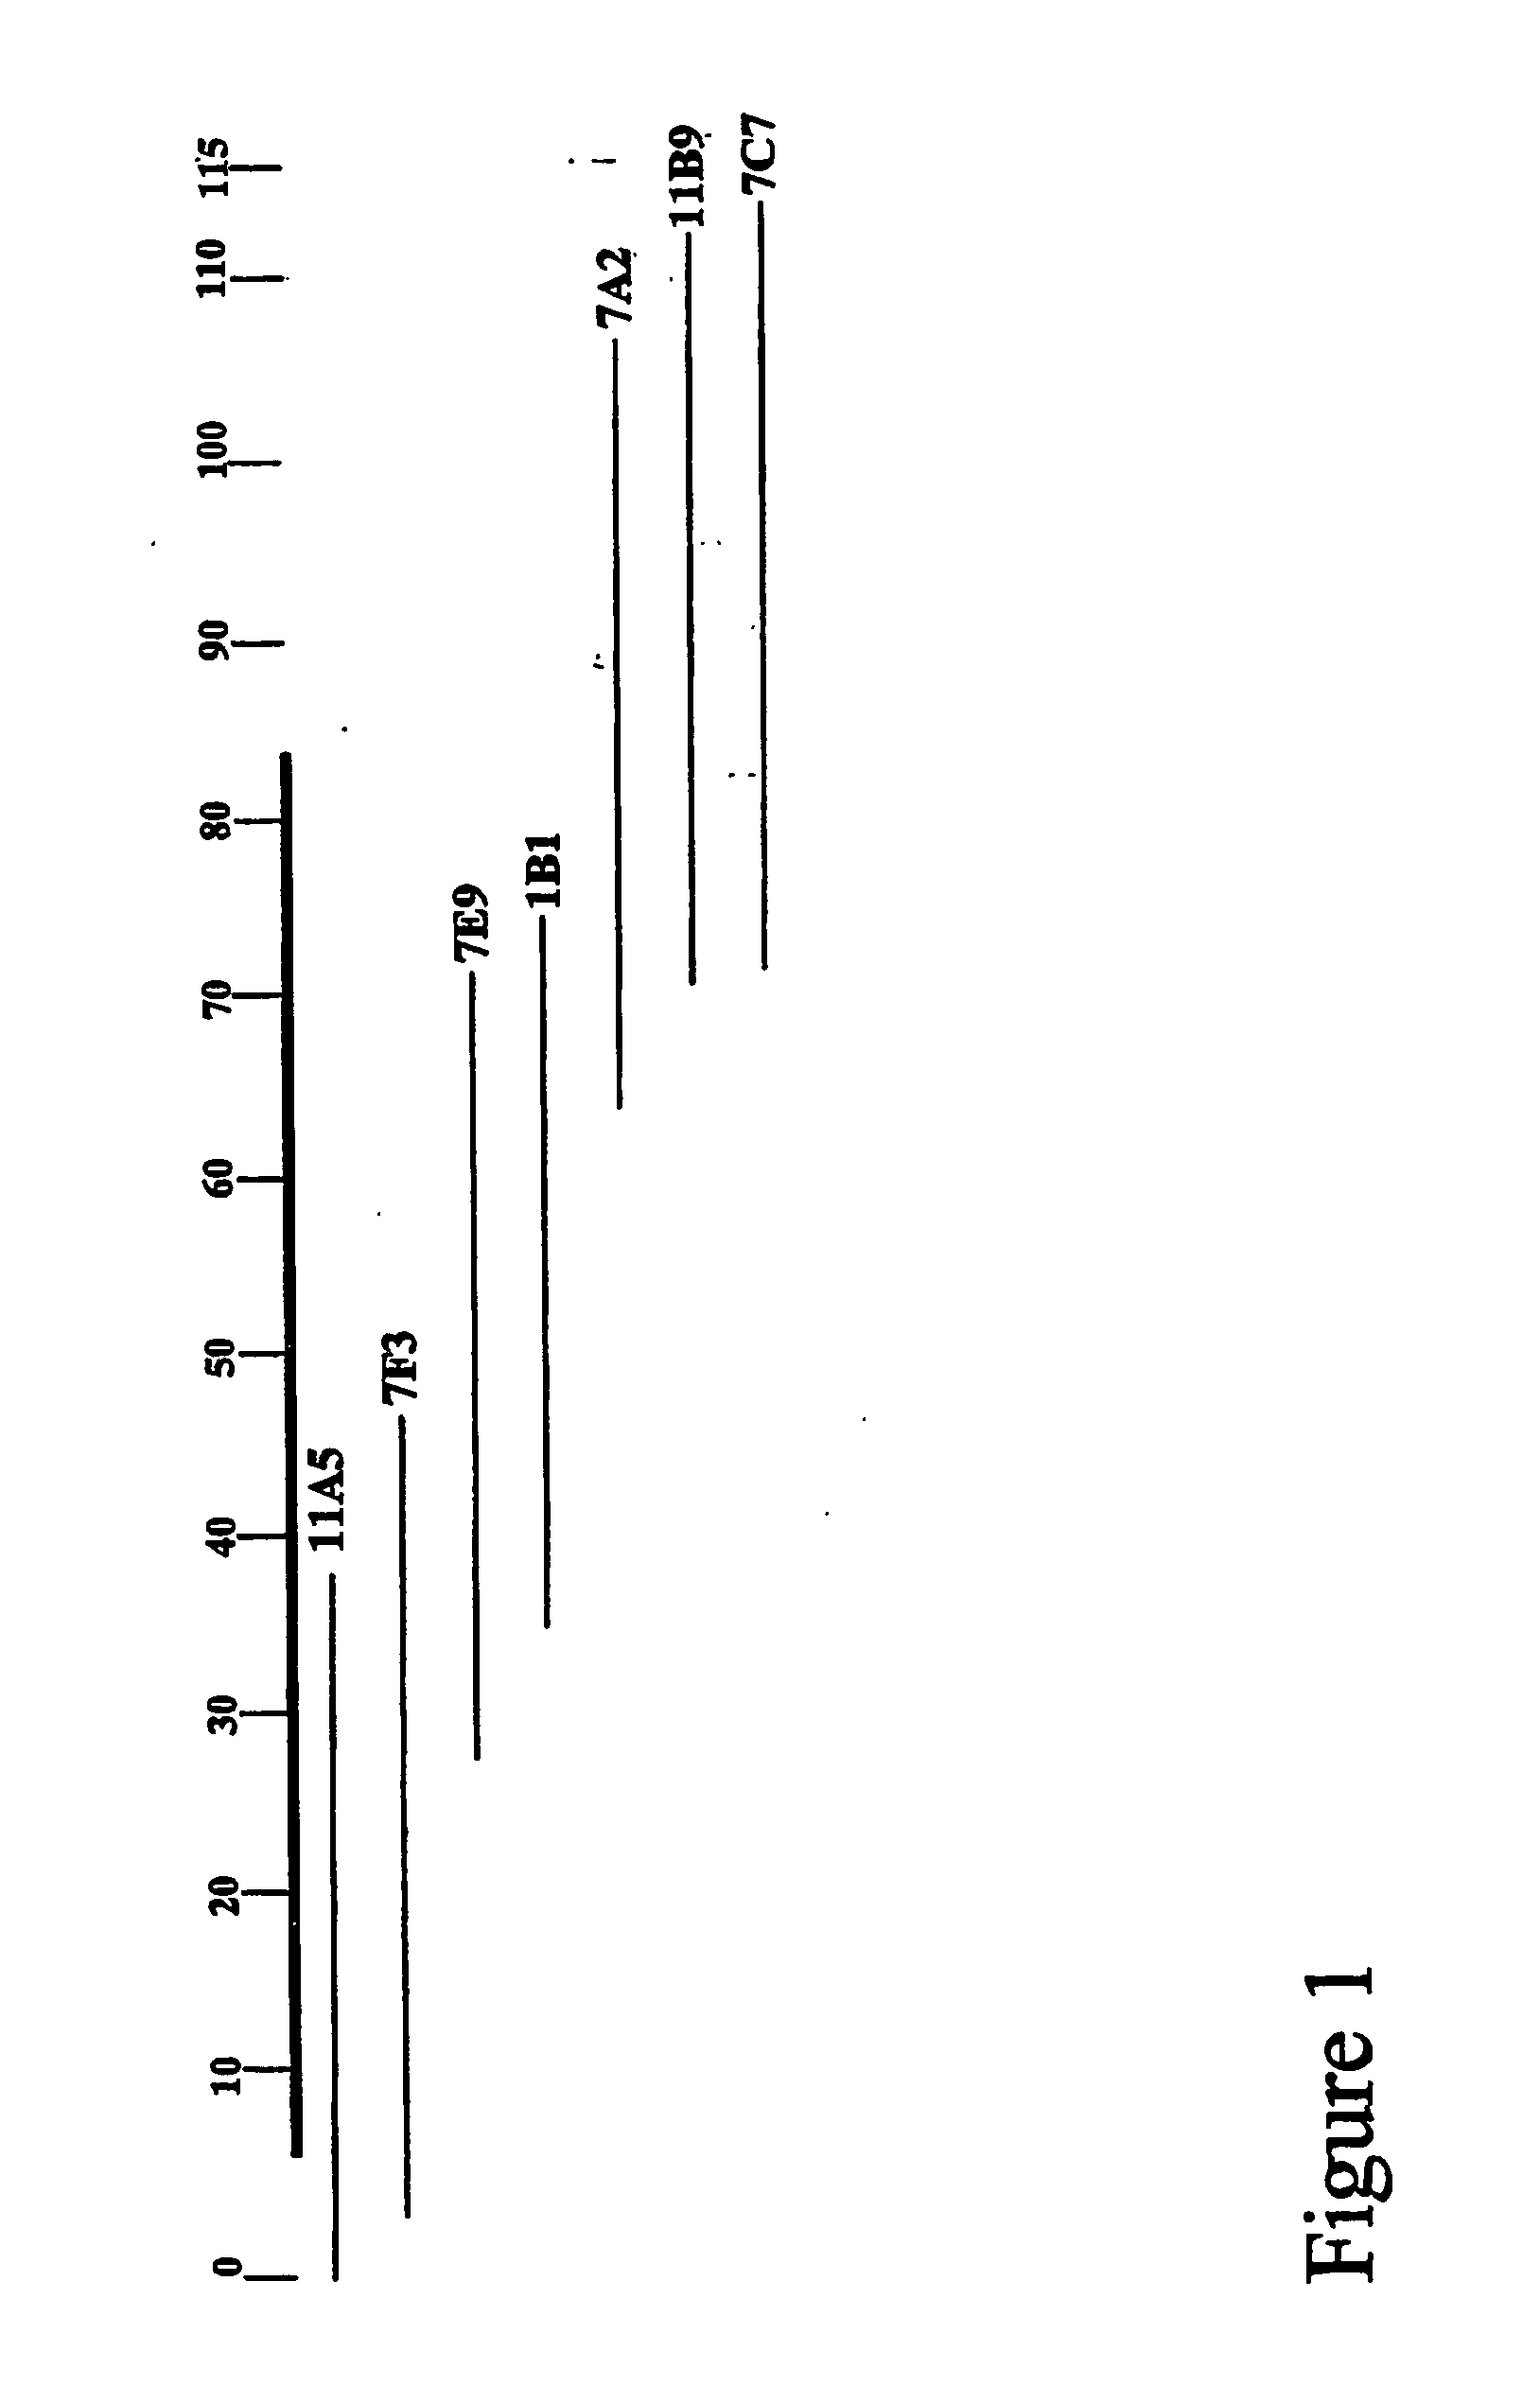 Genes and Proteins For the Biosynthesis of the Glycopeptide Antibiotic A40926